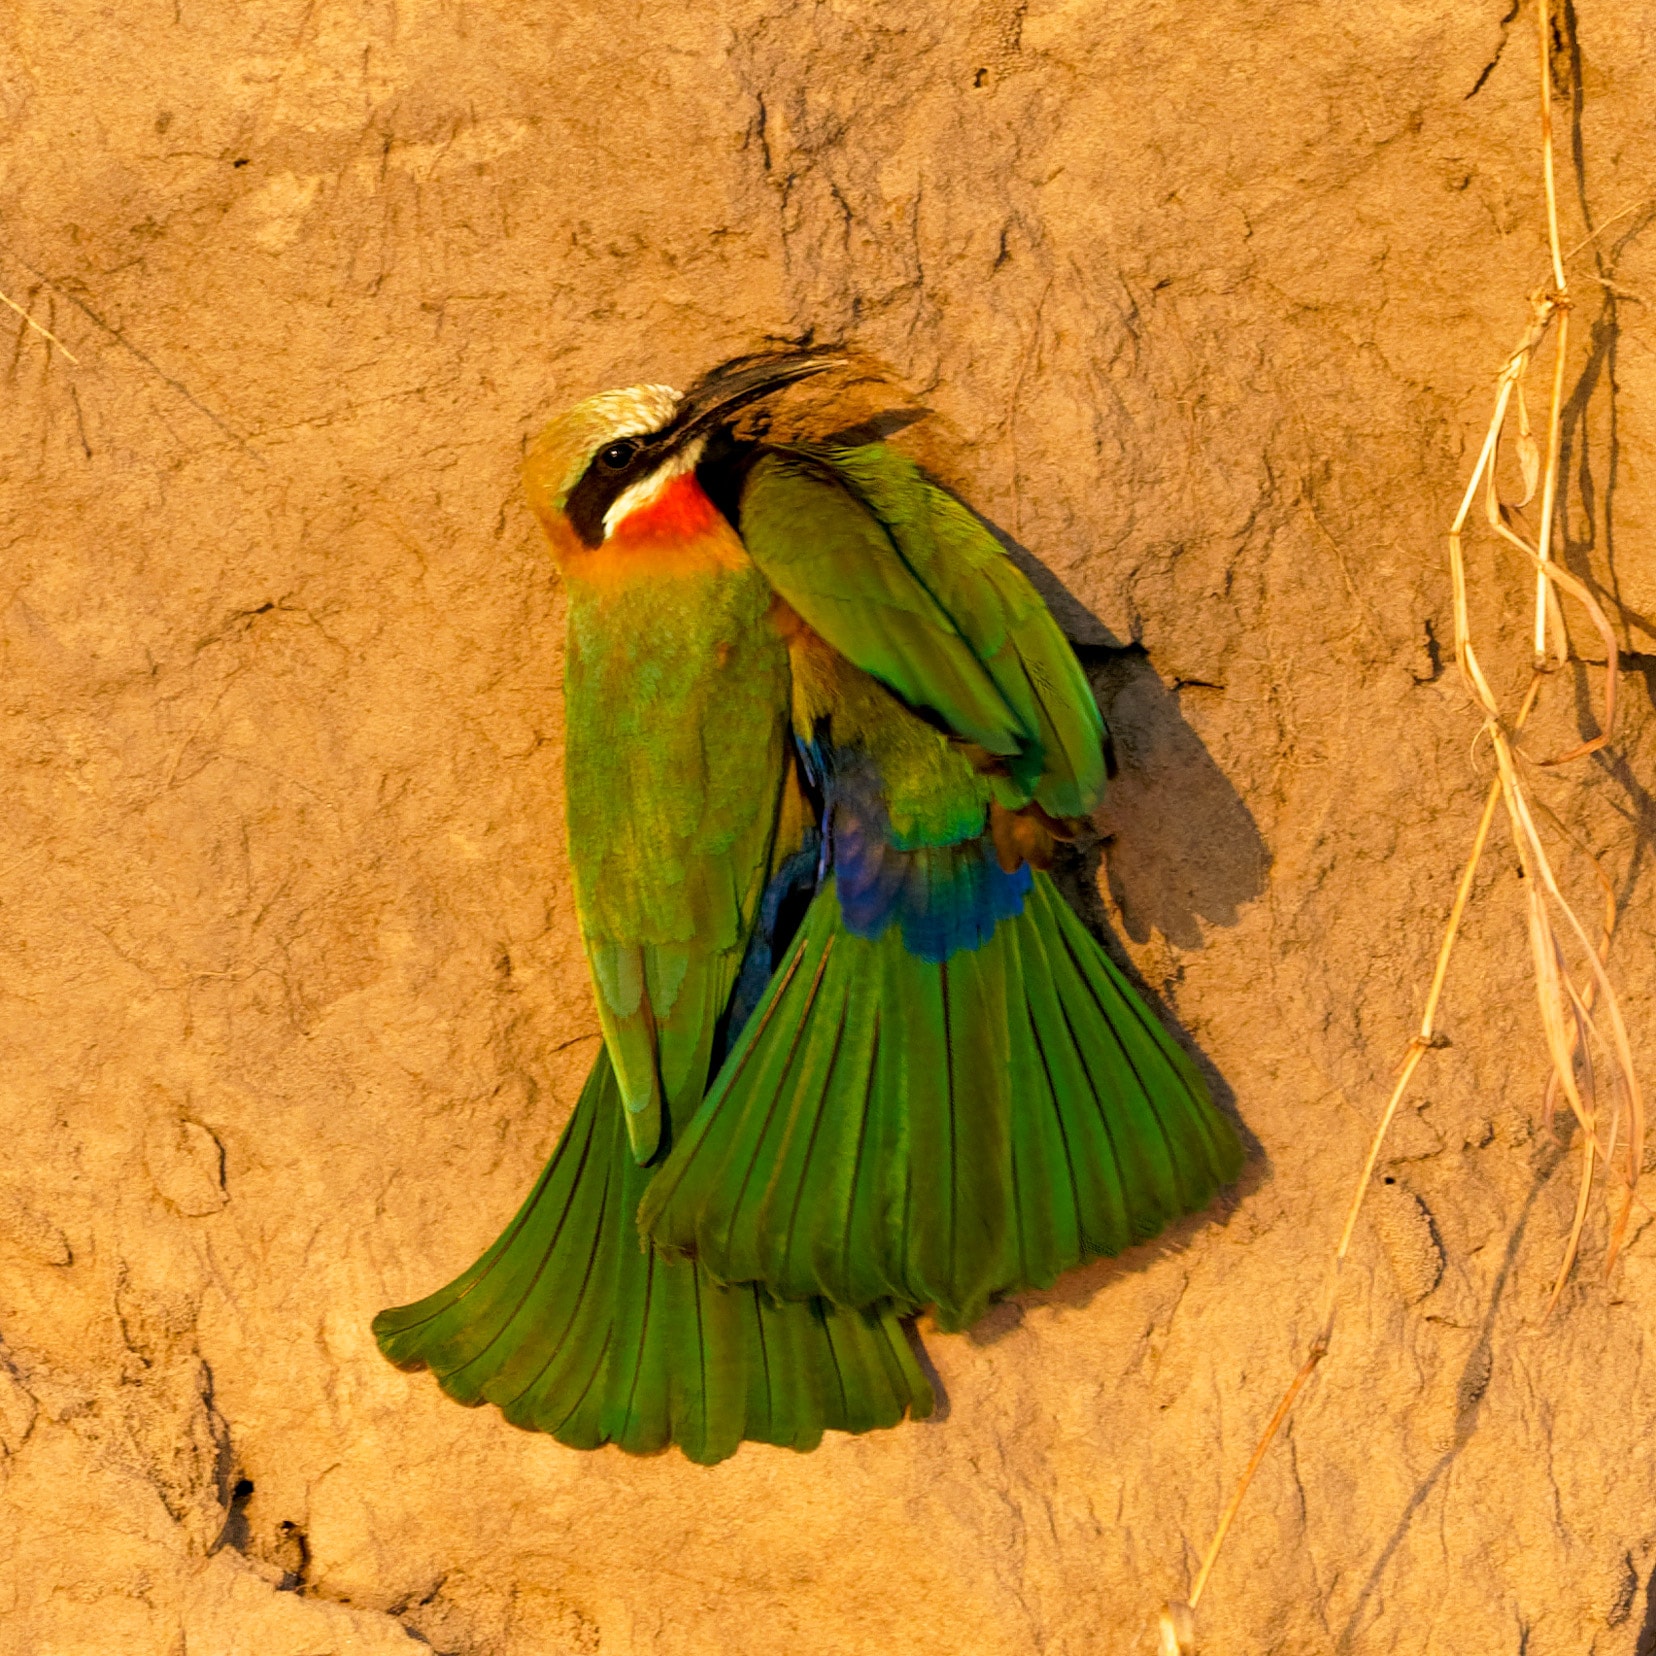 two white fronted bee-eaters by their burrow in the sandstone wall of the Okavango river